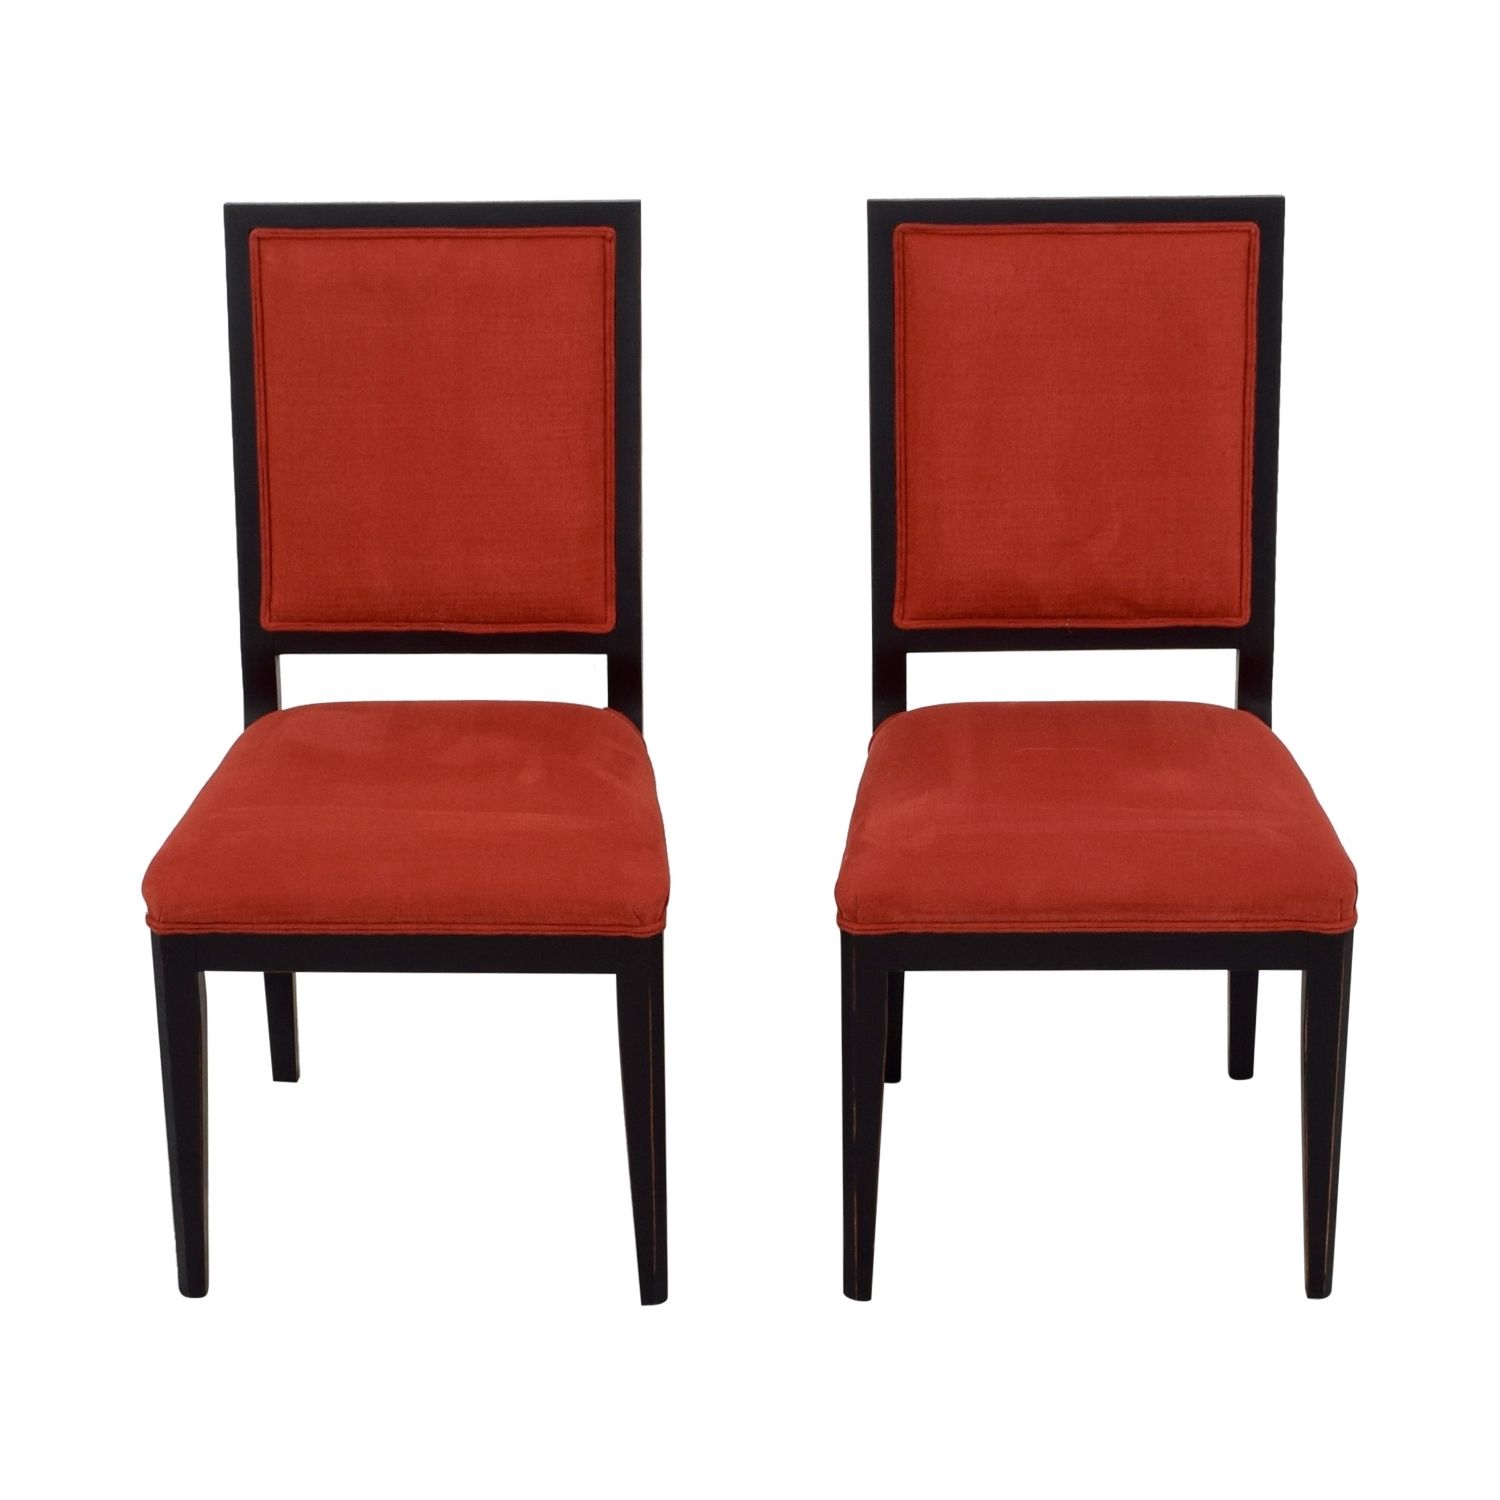 [%90% Off – Buying And Design Buying And Design Red Upholstered Dining Intended For Widely Used Red Dining Chairs|red Dining Chairs With Regard To Recent 90% Off – Buying And Design Buying And Design Red Upholstered Dining|2018 Red Dining Chairs Inside 90% Off – Buying And Design Buying And Design Red Upholstered Dining|most Current 90% Off – Buying And Design Buying And Design Red Upholstered Dining Inside Red Dining Chairs%] (Photo 19 of 25)